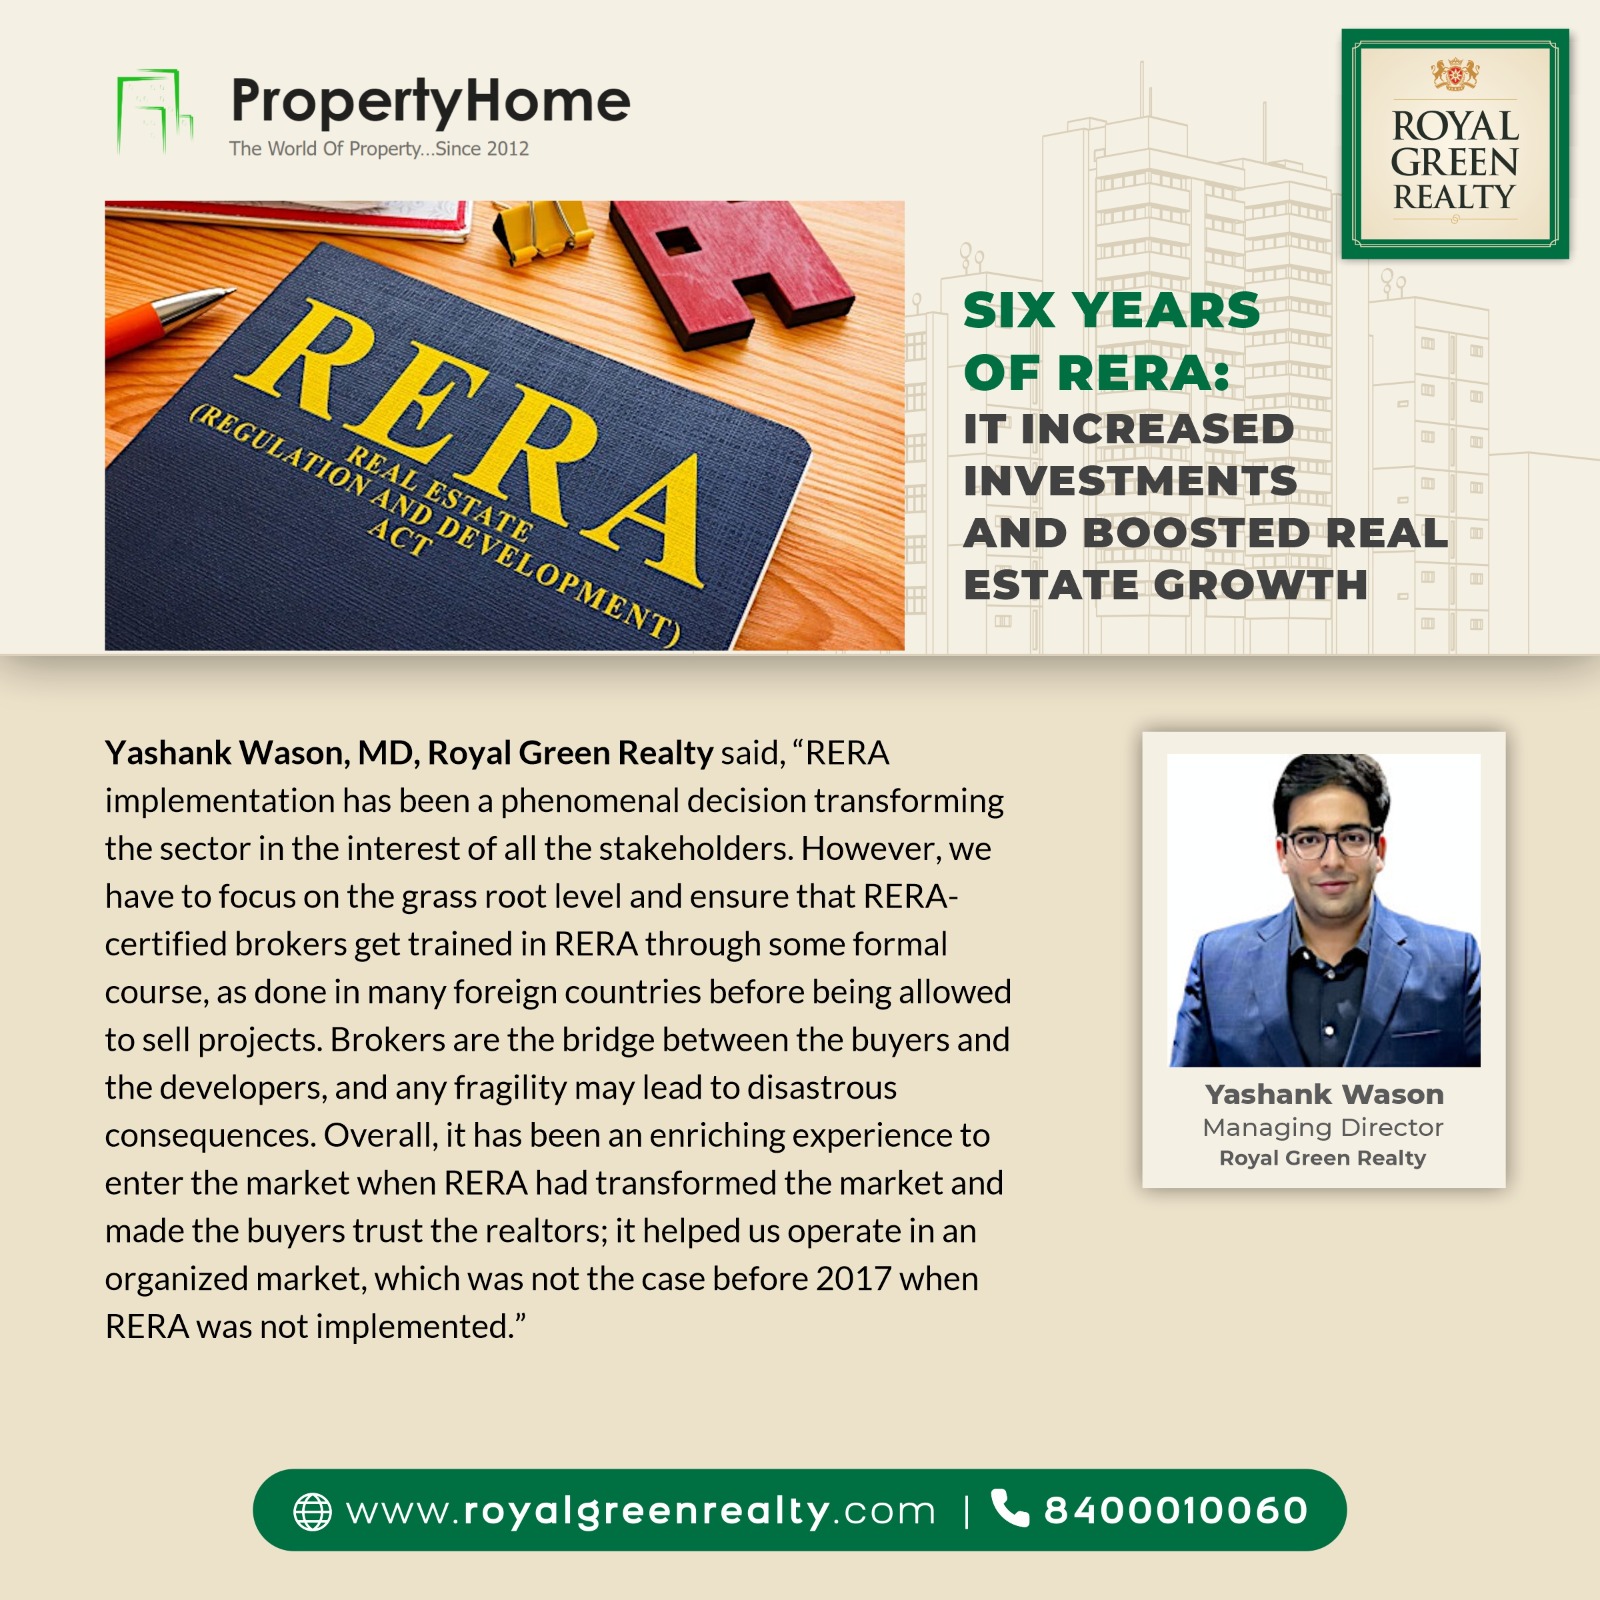 Six Years of Rera: It increased investments and bossted real estate growth